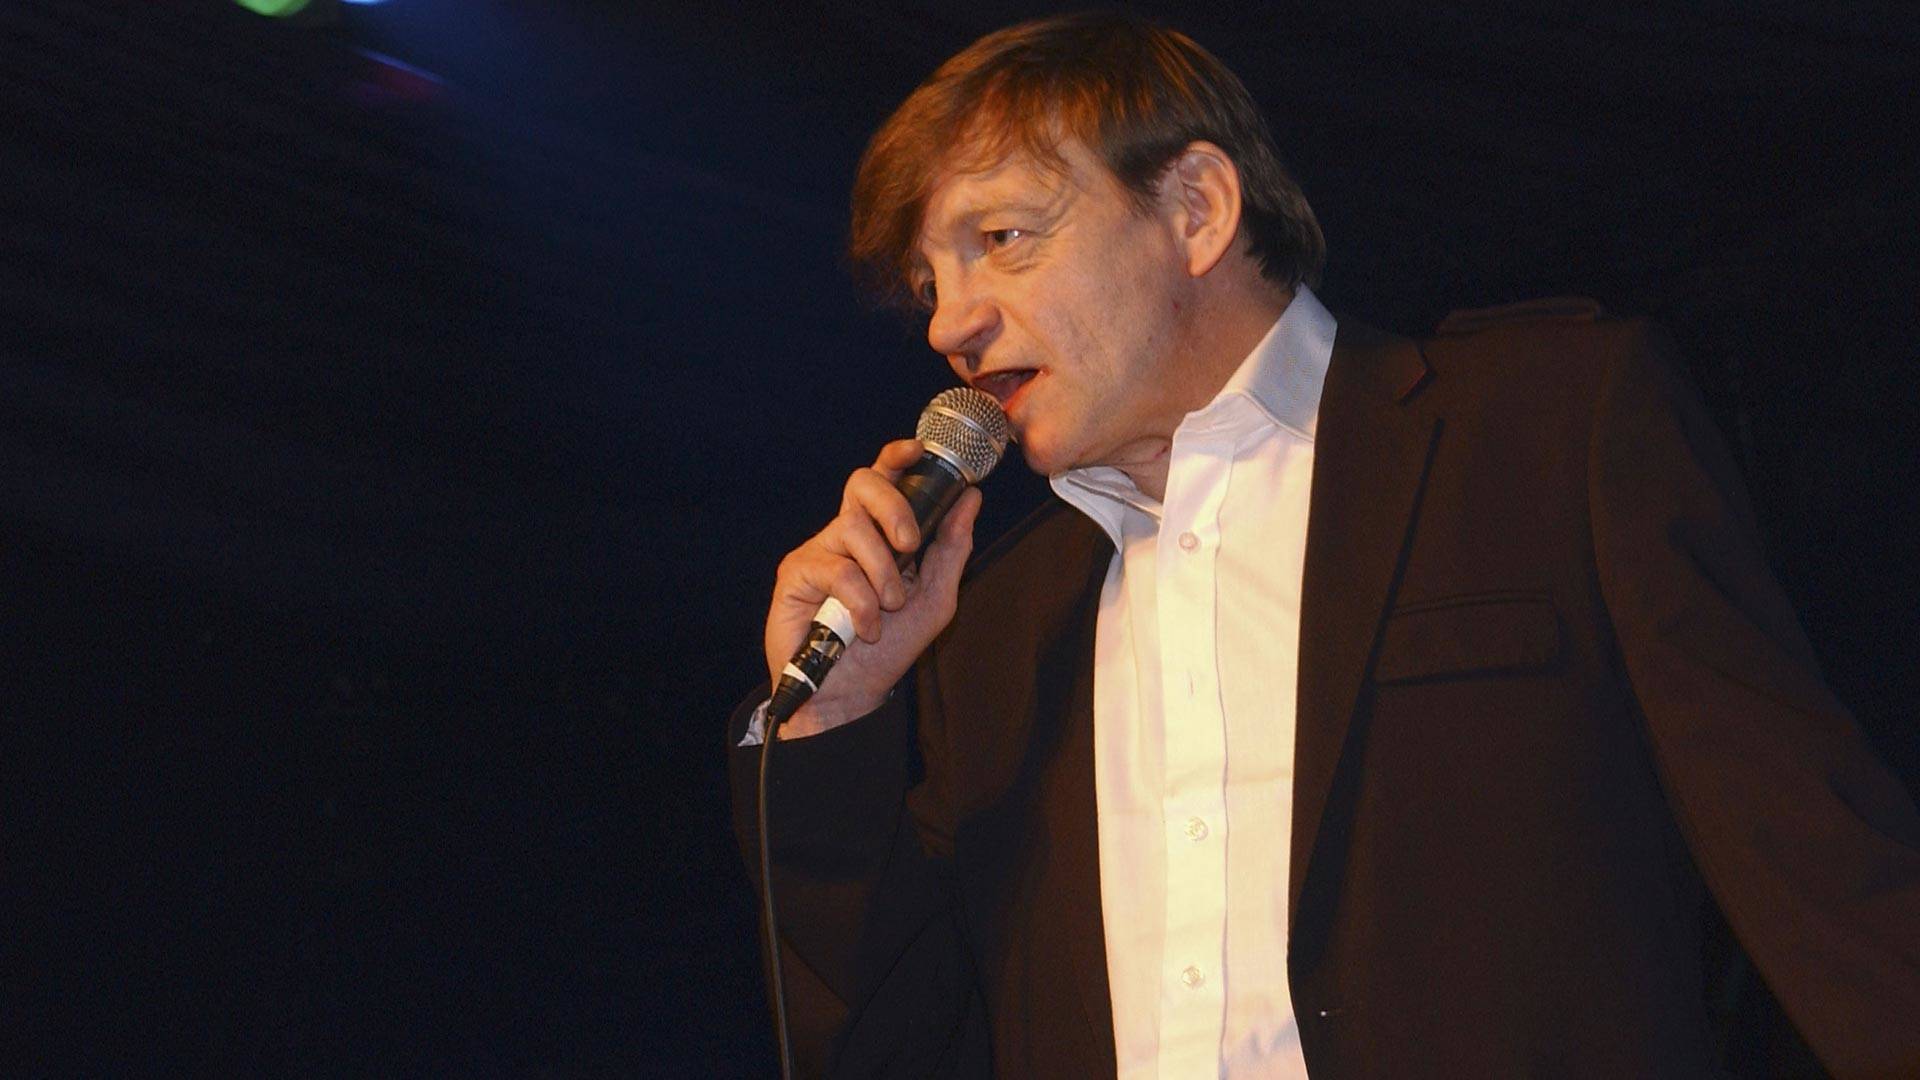 Mark E. Smith of The Fall performs at the Hammersmith Palais on April 1, 2007 in London. This was the last scheduled concert at the historic West London venue, immortalized by The Clash song 'White Man In Hammersmith Palais.' Jim Dyson/Getty Images